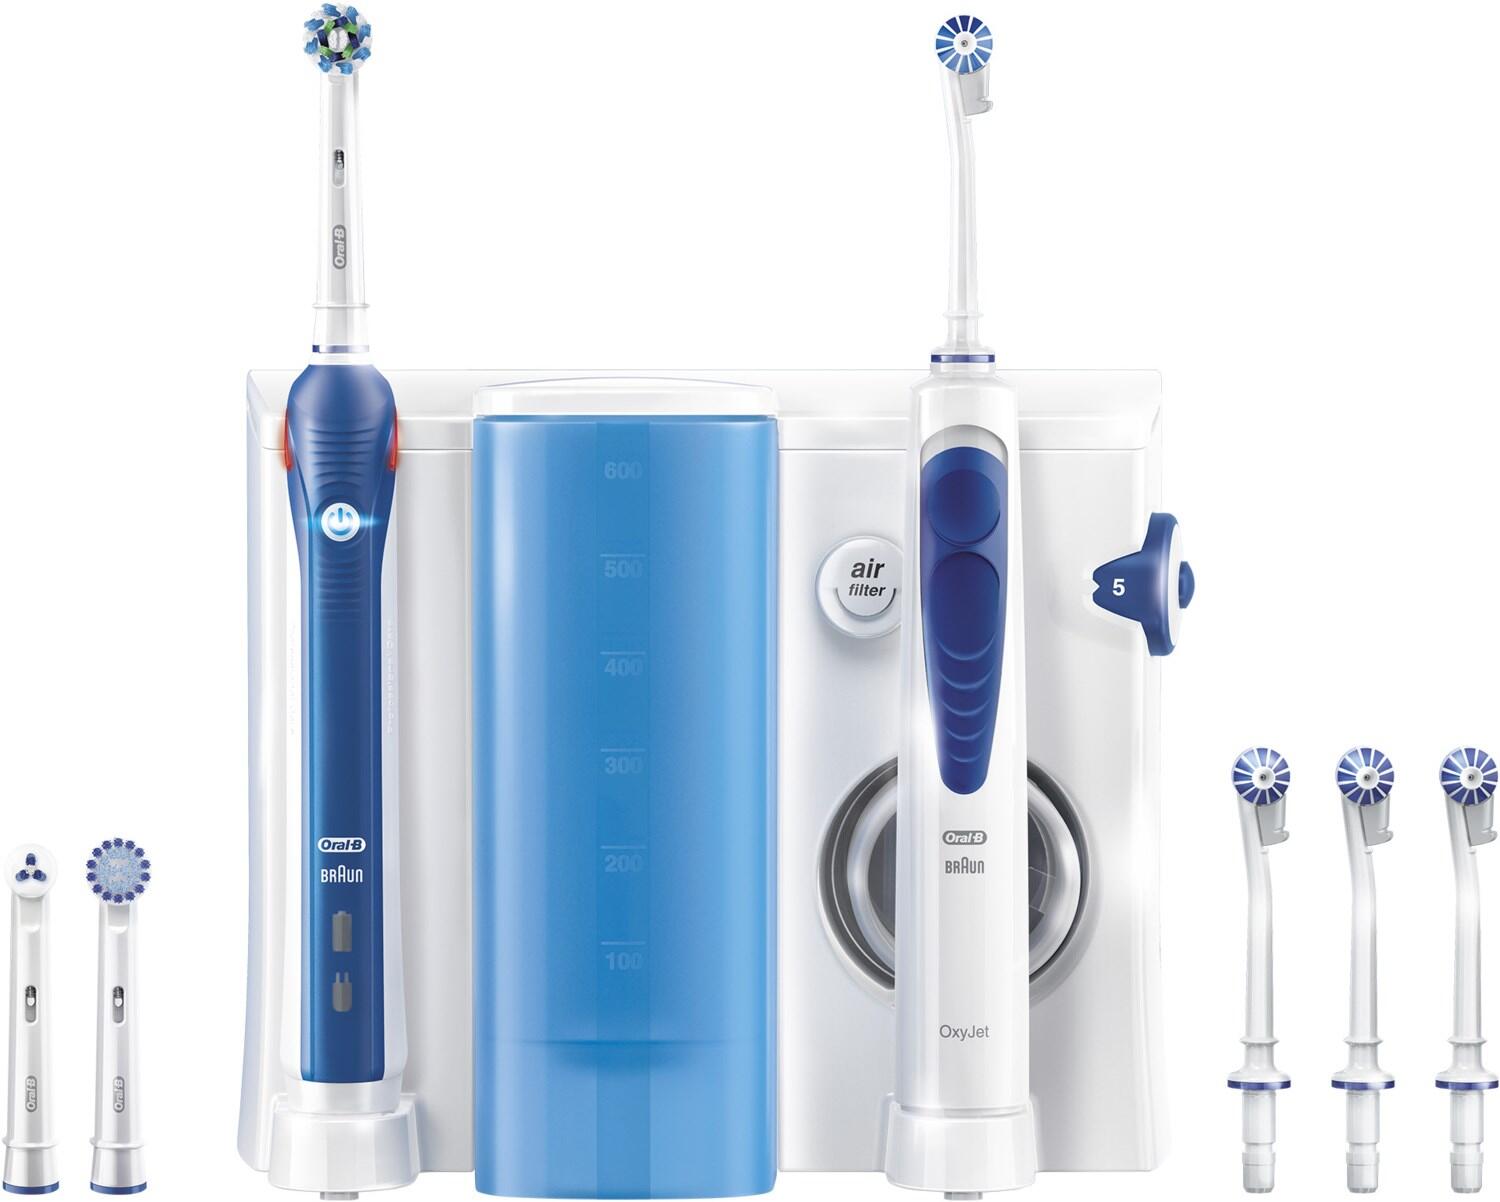 OralB OxyJet oral irrigator + PRO 2 tooth / mouth care | Letzshop